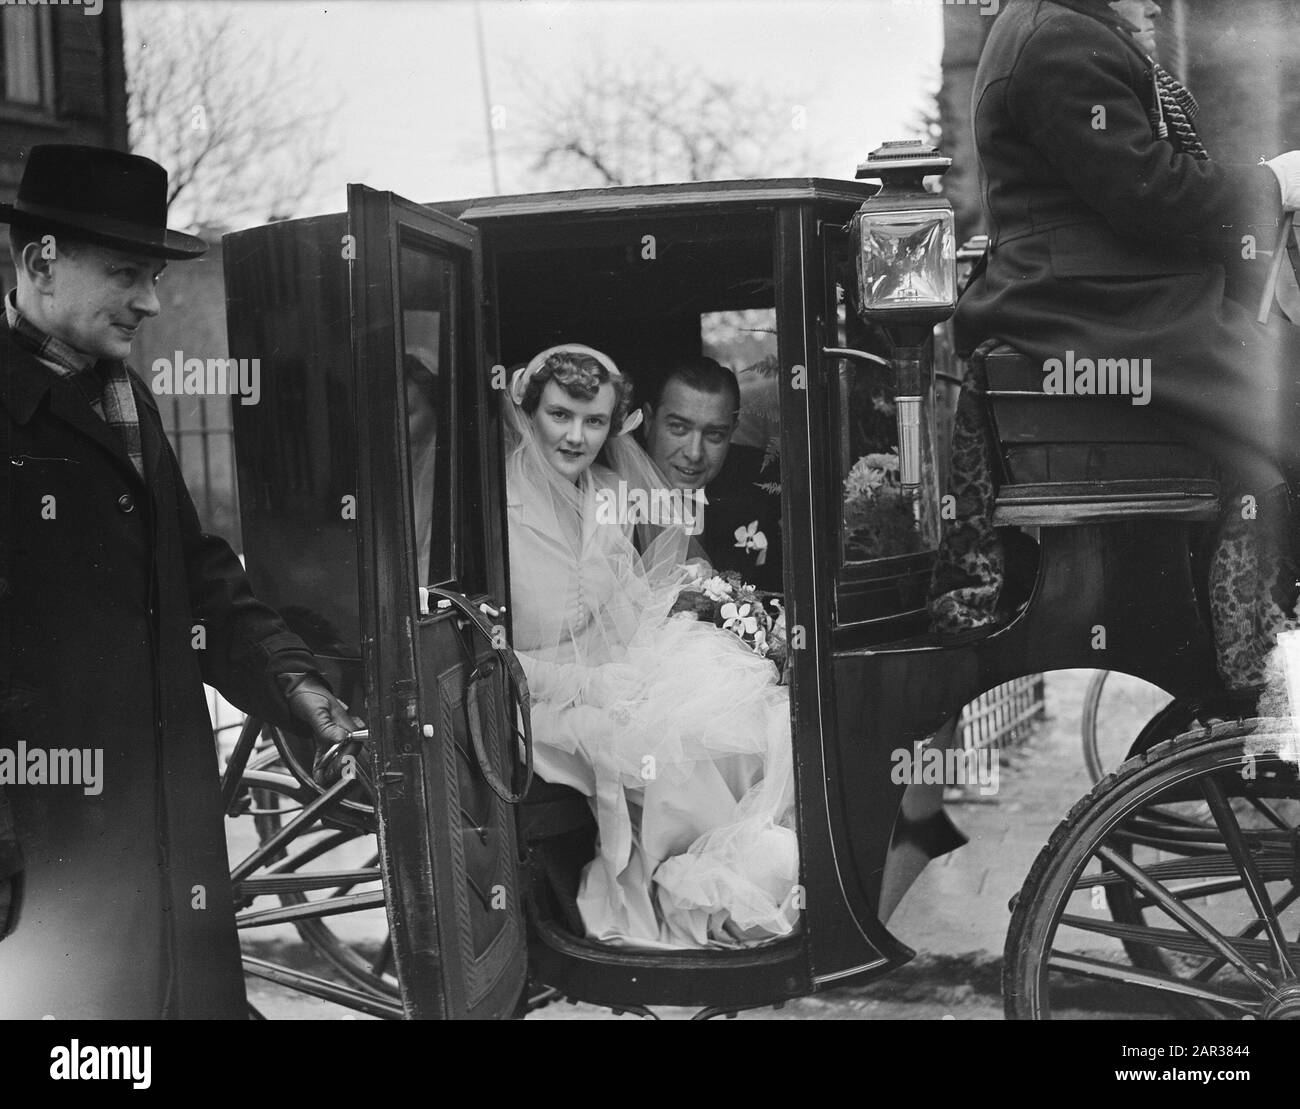 Marriage of Mr. Hans Smulders with Mary Sevenstern. Bride and groom in the carriage Annotation: J.P.M.A. Smulders (1912-) was a member of the management Anefo. Mary Sevenstern was a daughter of the owner of the distillery Sevenstern in Dieren Date: 4 January 1951 Keywords: bridal couples, marriages, carriages Personal name: Sevenstern, M., Smulders, J.P.M.A. Stock Photo